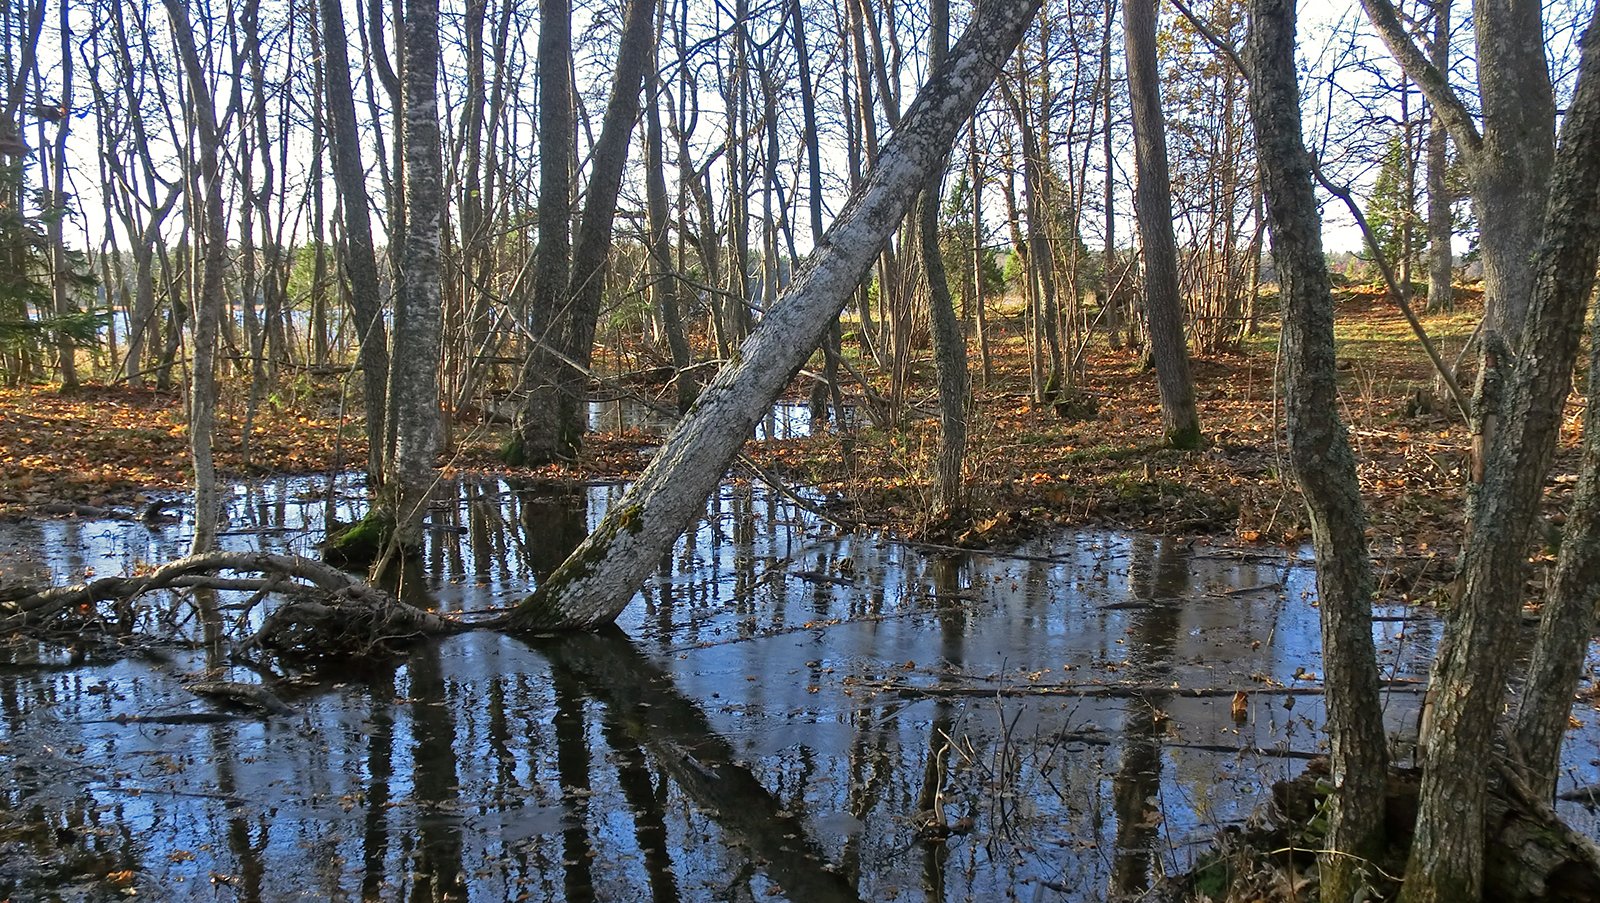 Do not miss the intriguing flooded forest inside the nature reserve.